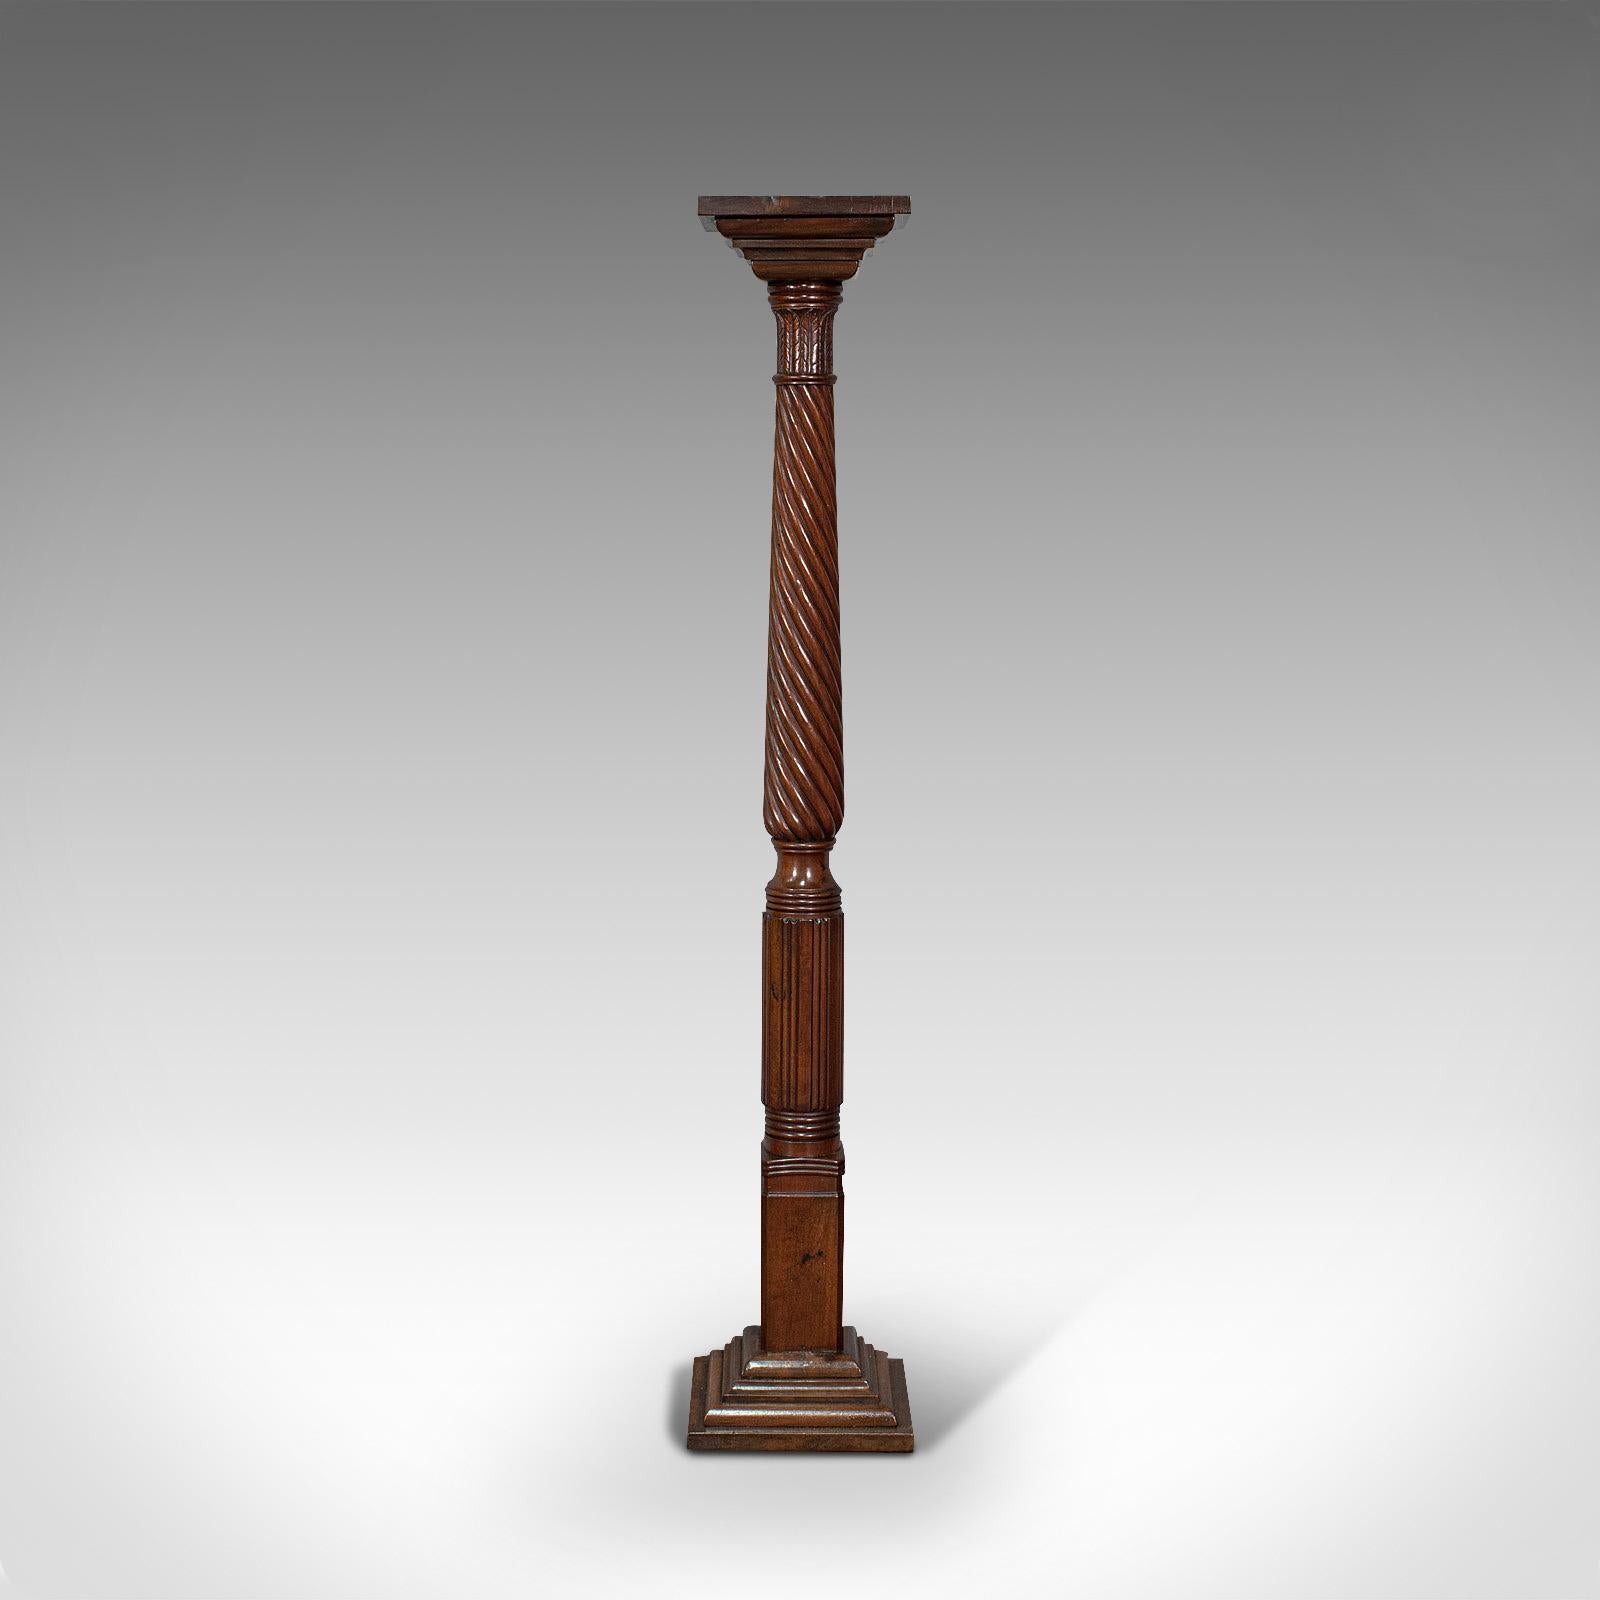 This is an antique torchere. An English, mahogany plant stand or jardinière, dating to the William IV period and later, circa 1830.

Appealing, early 19th century antique stand
Displaying a desirable aged patina with minimal signs of wear under